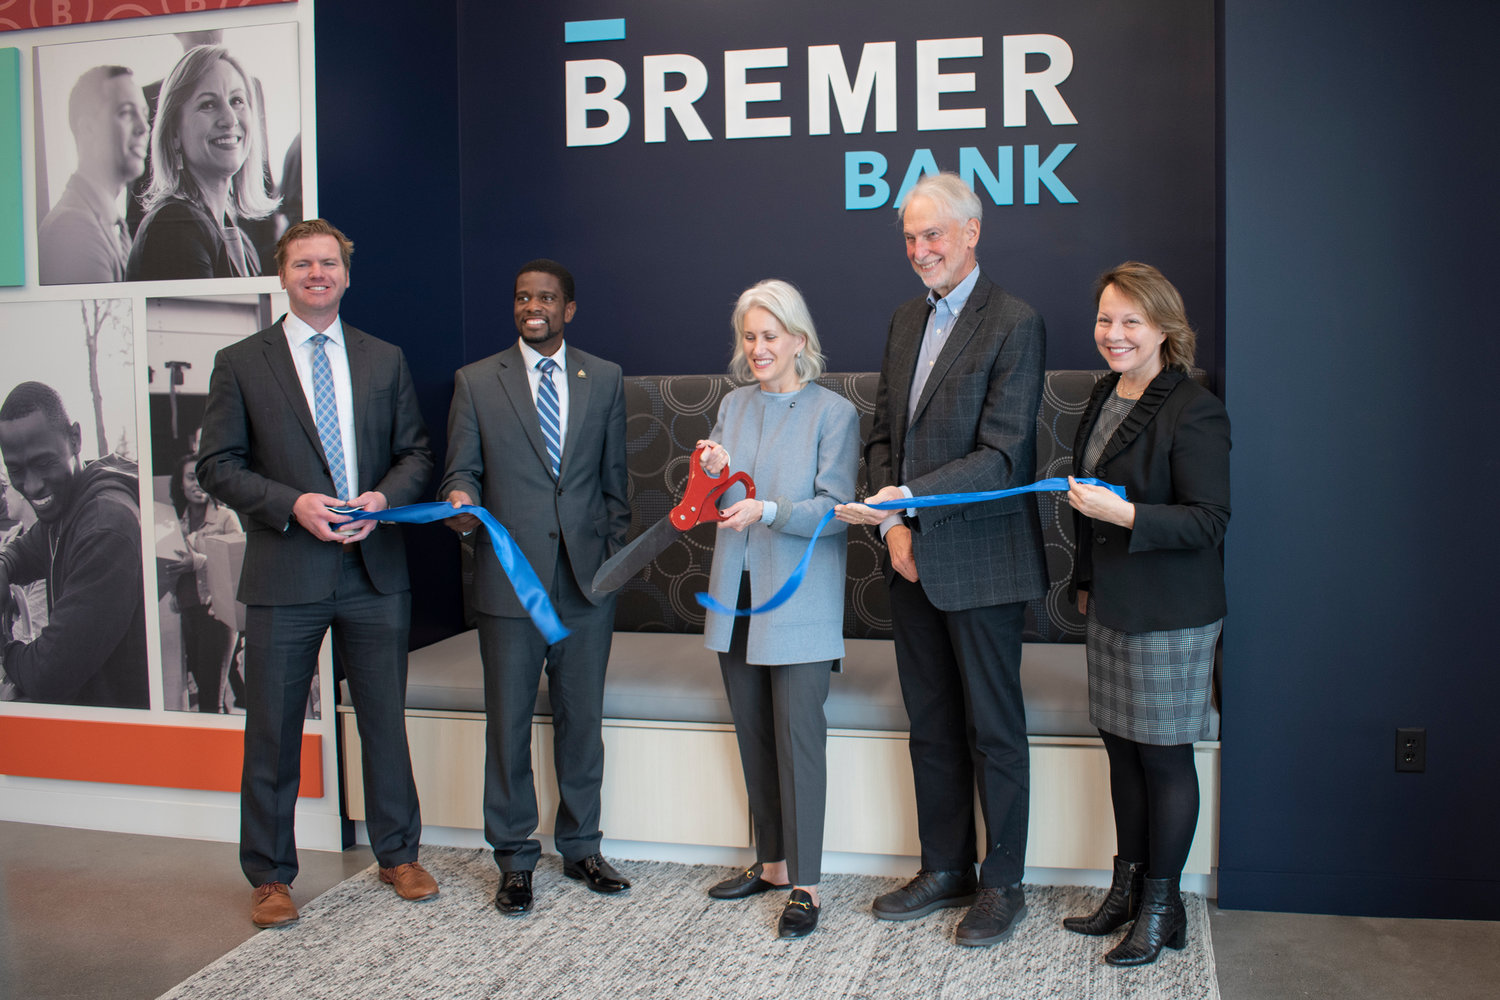 Bremer opened at their old space, in a new building that also features The Pitch apartments.